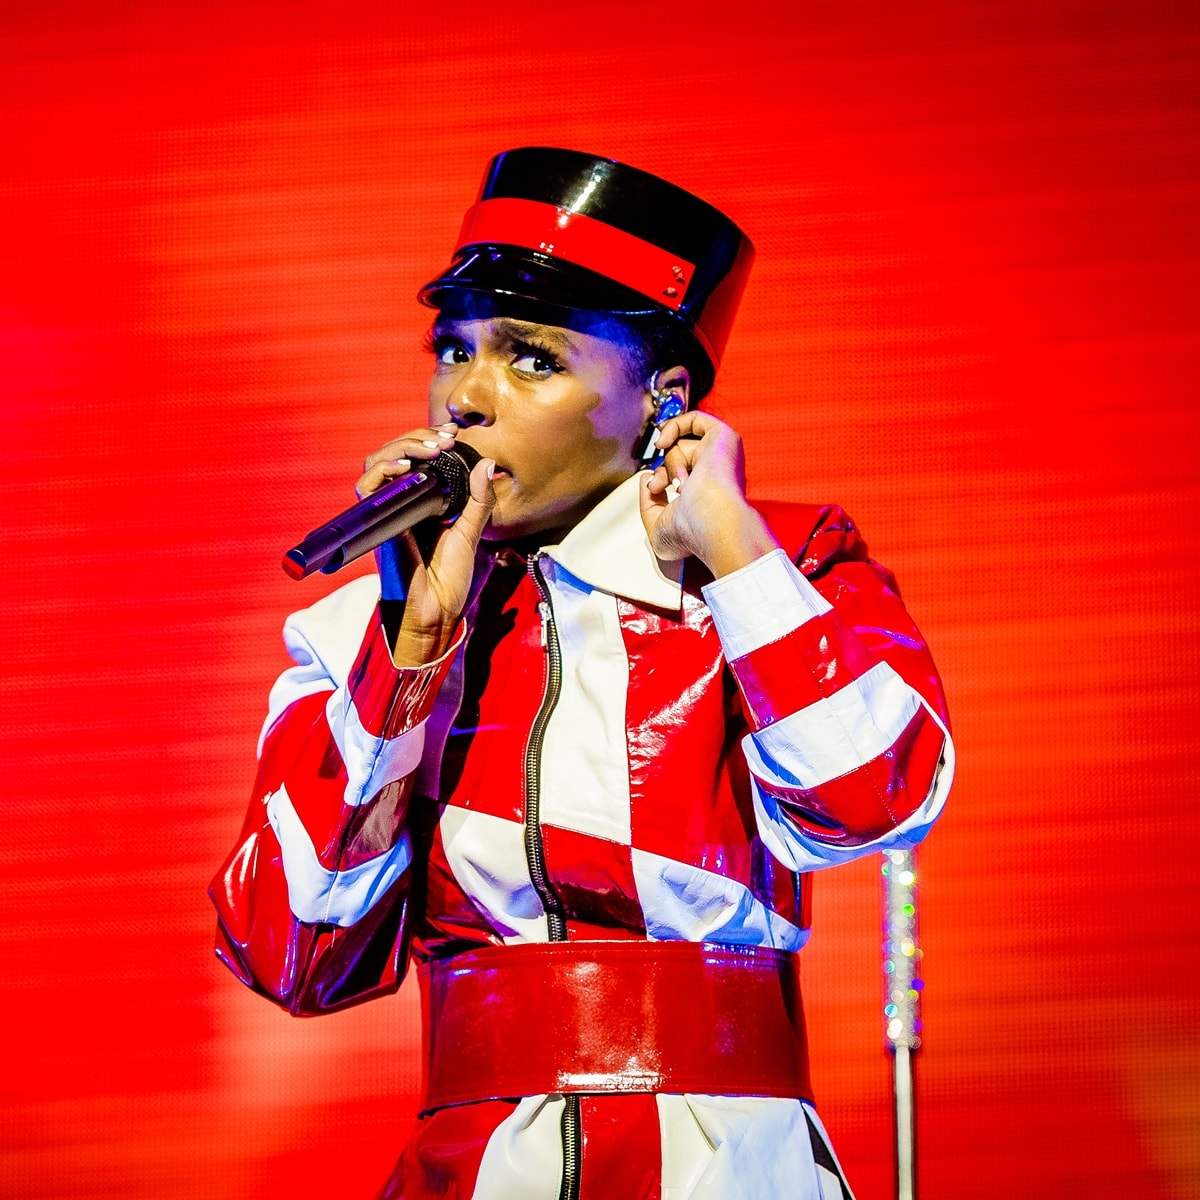 Janelle Monáe Robinson was honored with the Billboard Women in Music Rising Star Award in 2015 and the Trailblazer of the Year Award in 2018